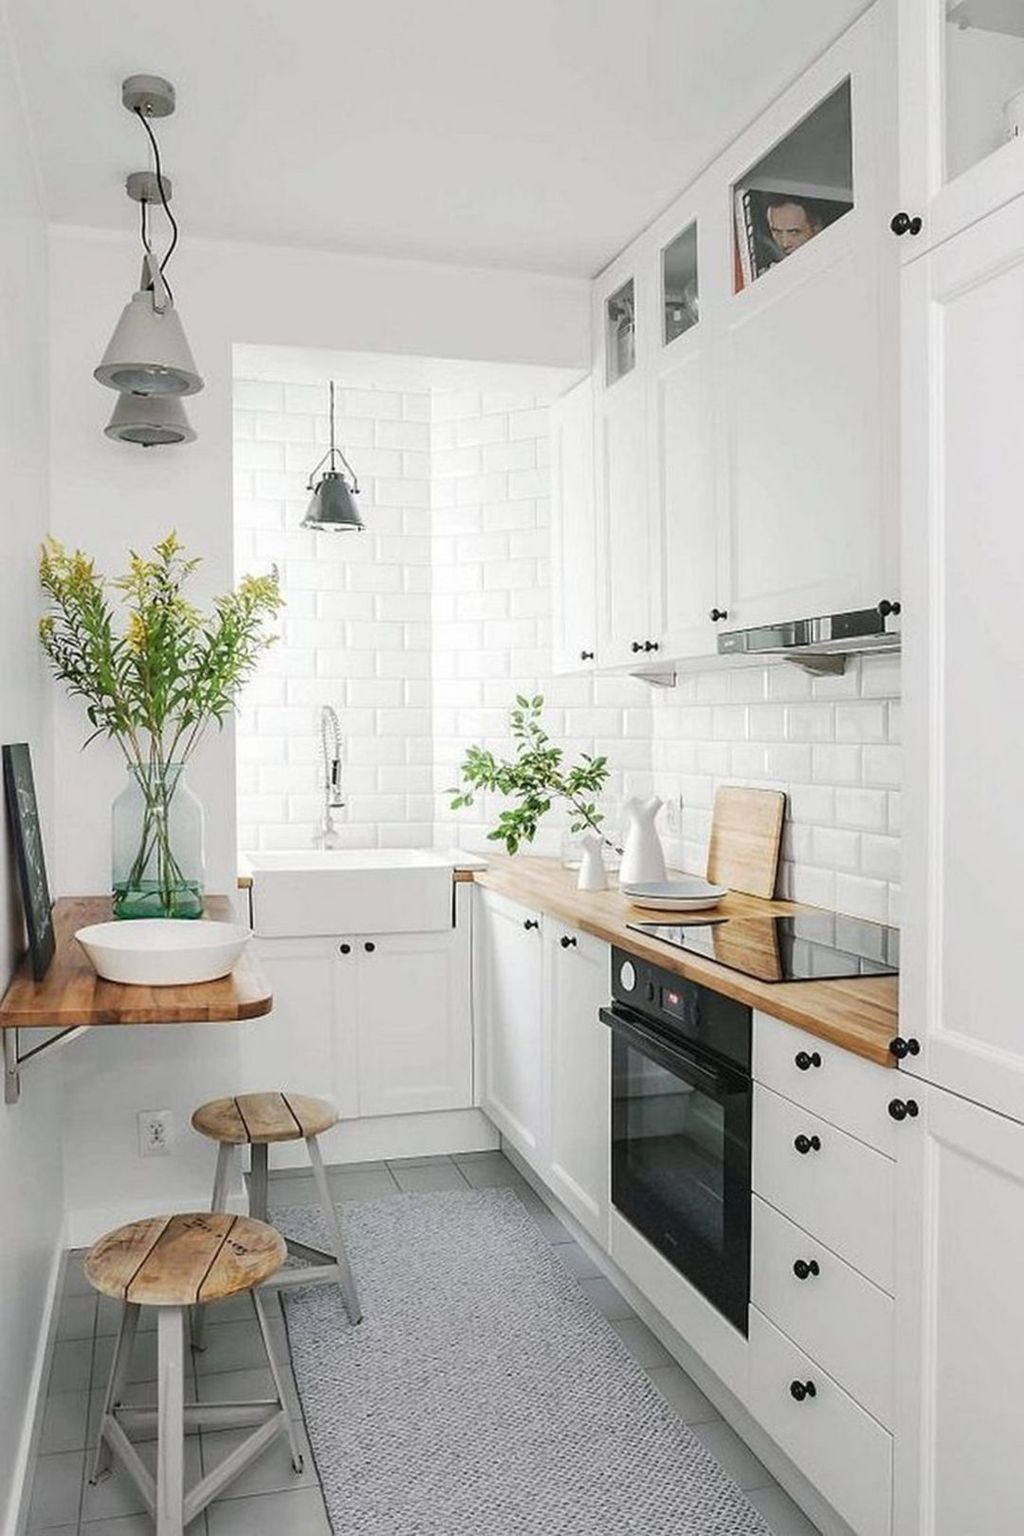 Enchanting Kitchen Design Ideas For Small Spaces16